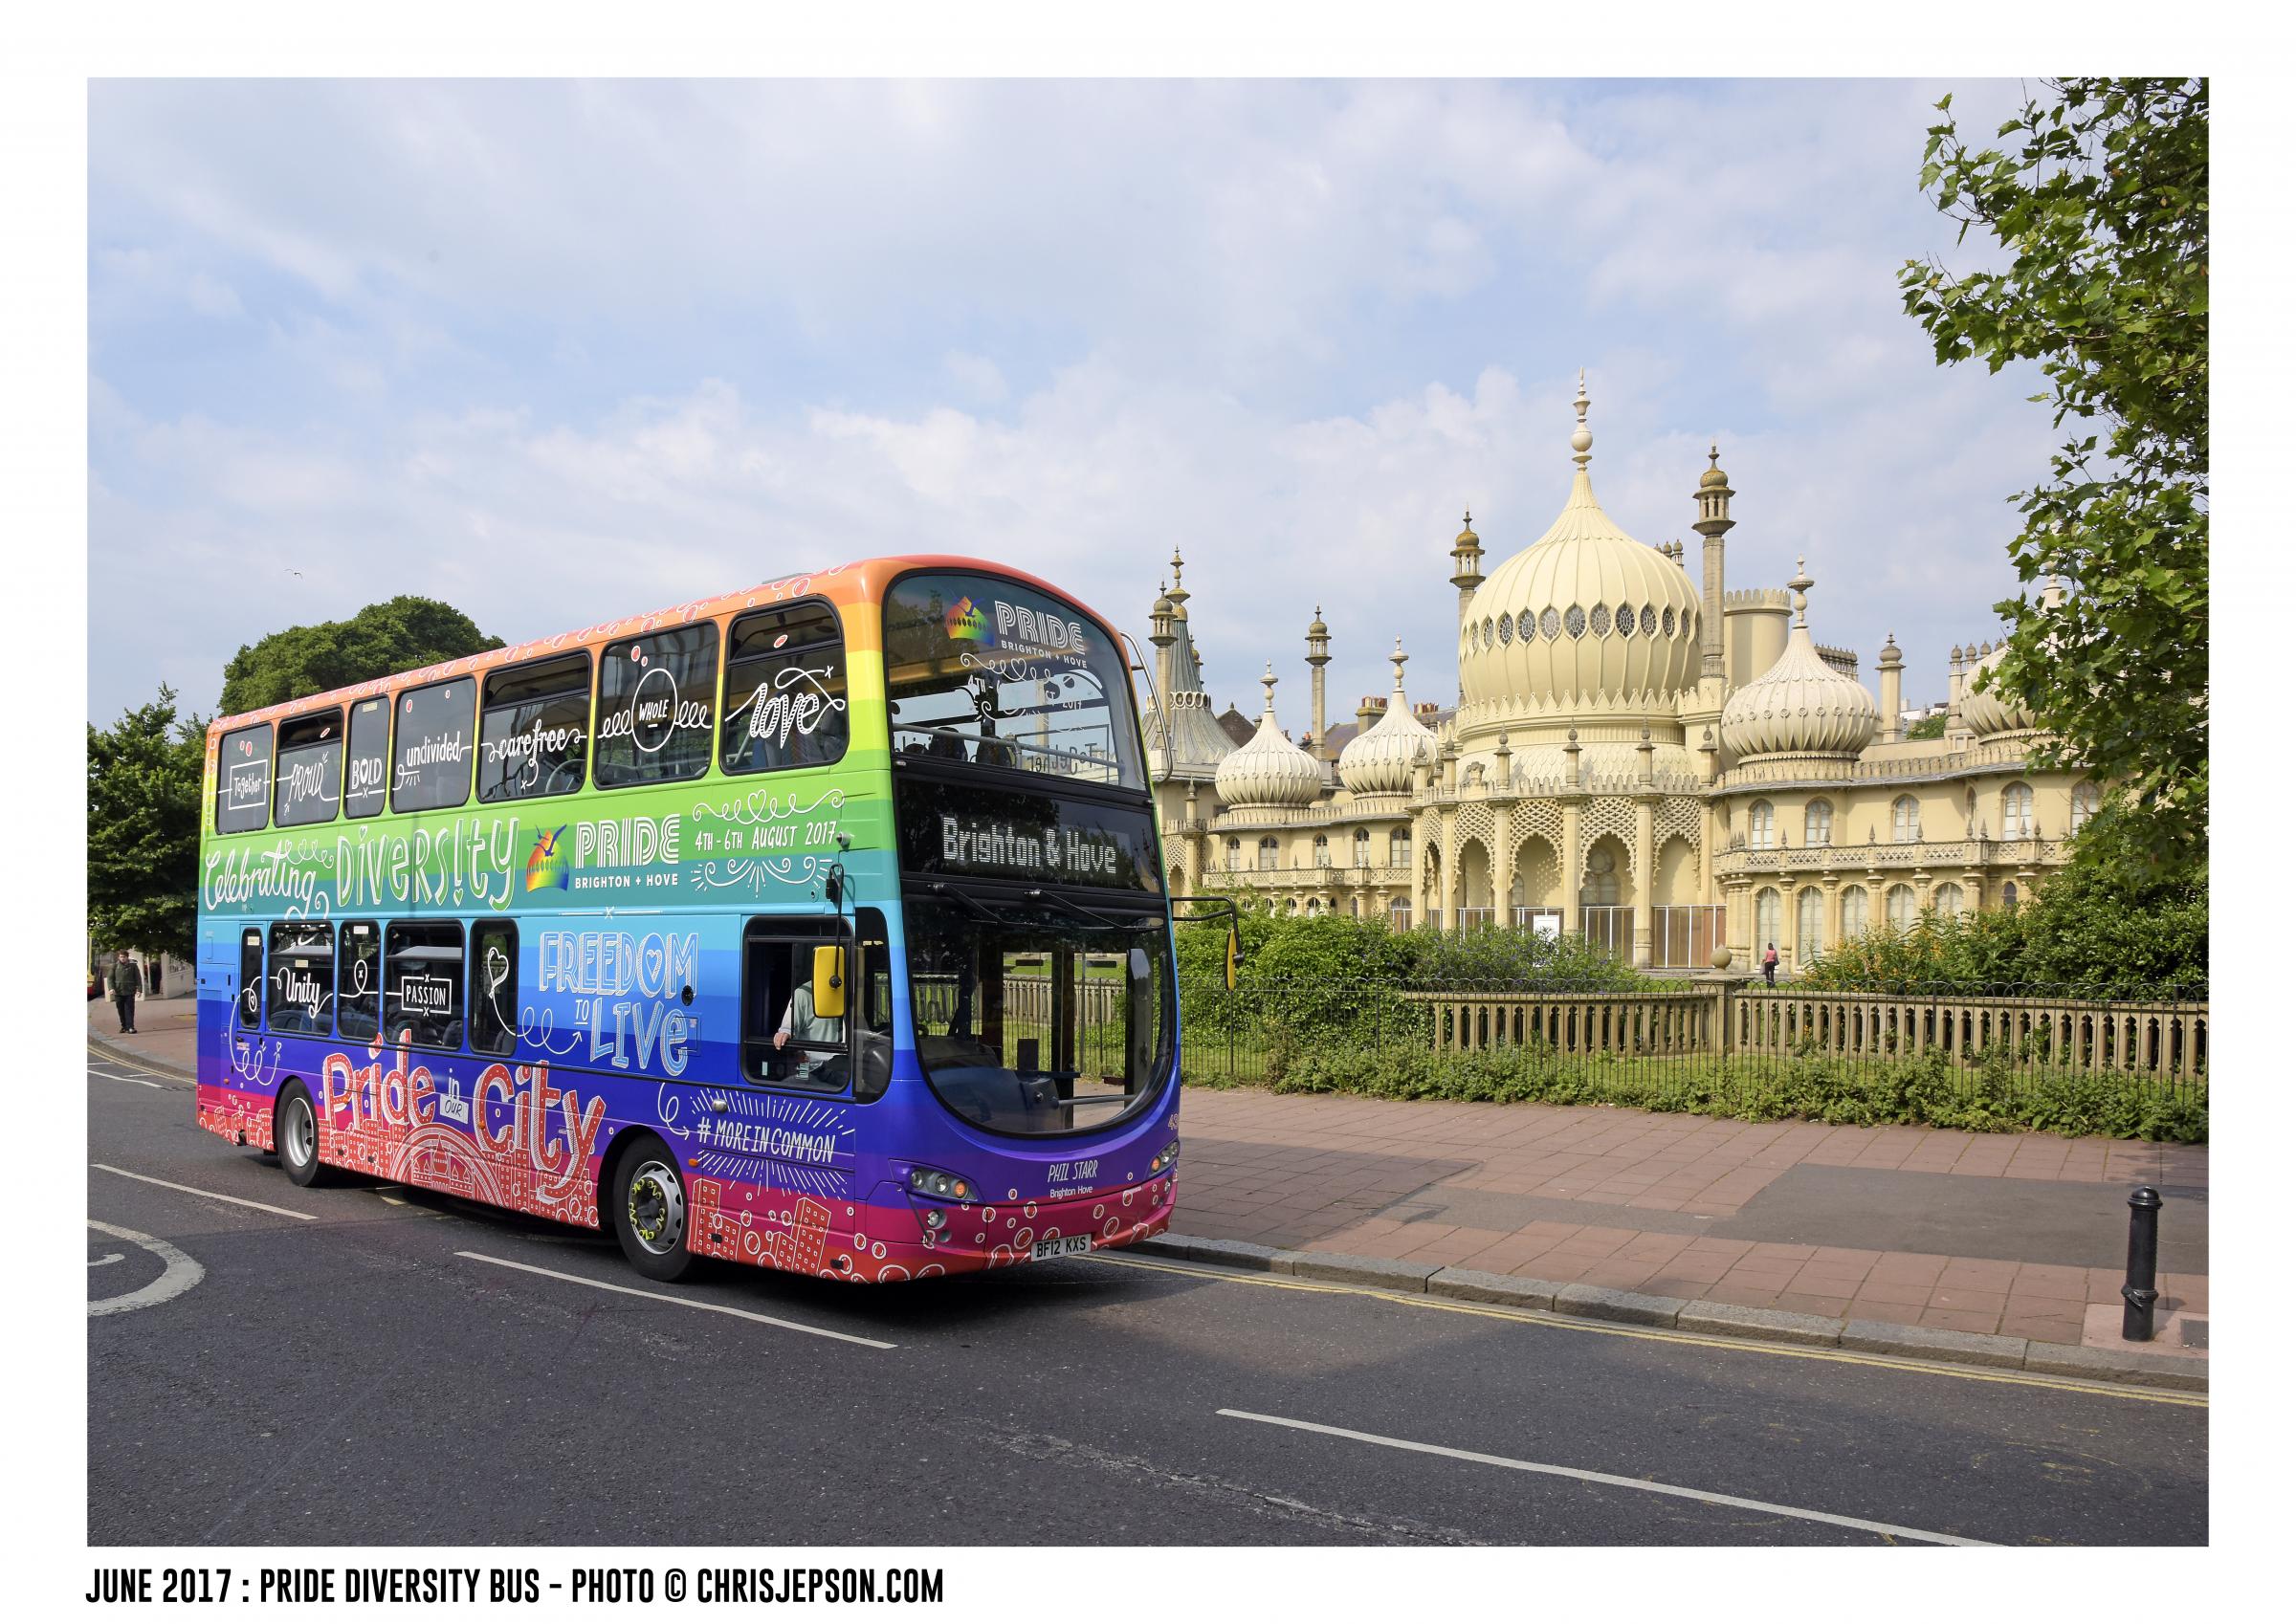 Diversity Bus is launched ahead of Brighton Pride 2017